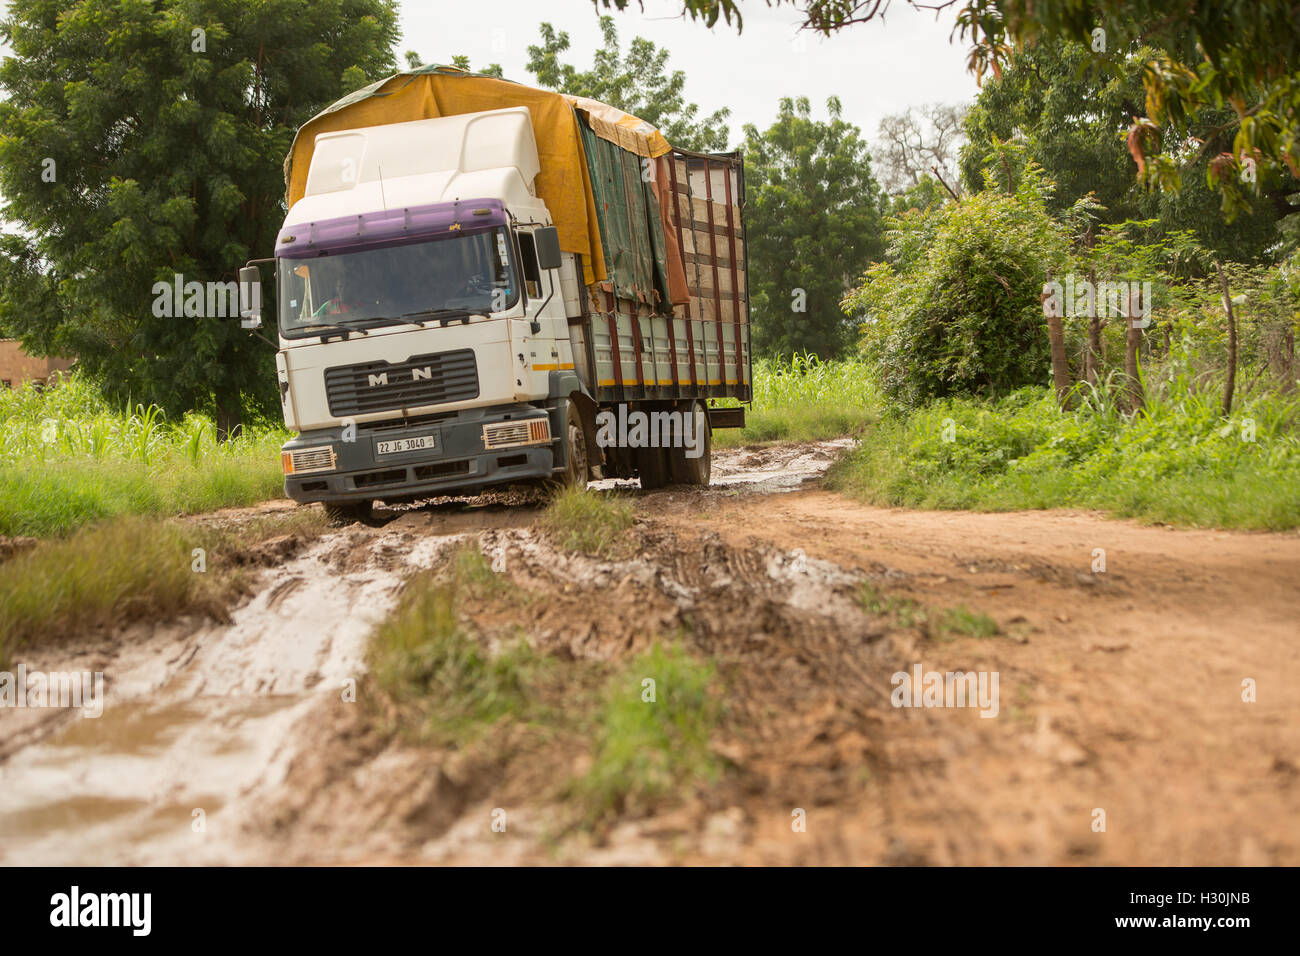 A lorry navigates poor rural road conditions in Réo, Burkina Faso, West Africa. Stock Photo